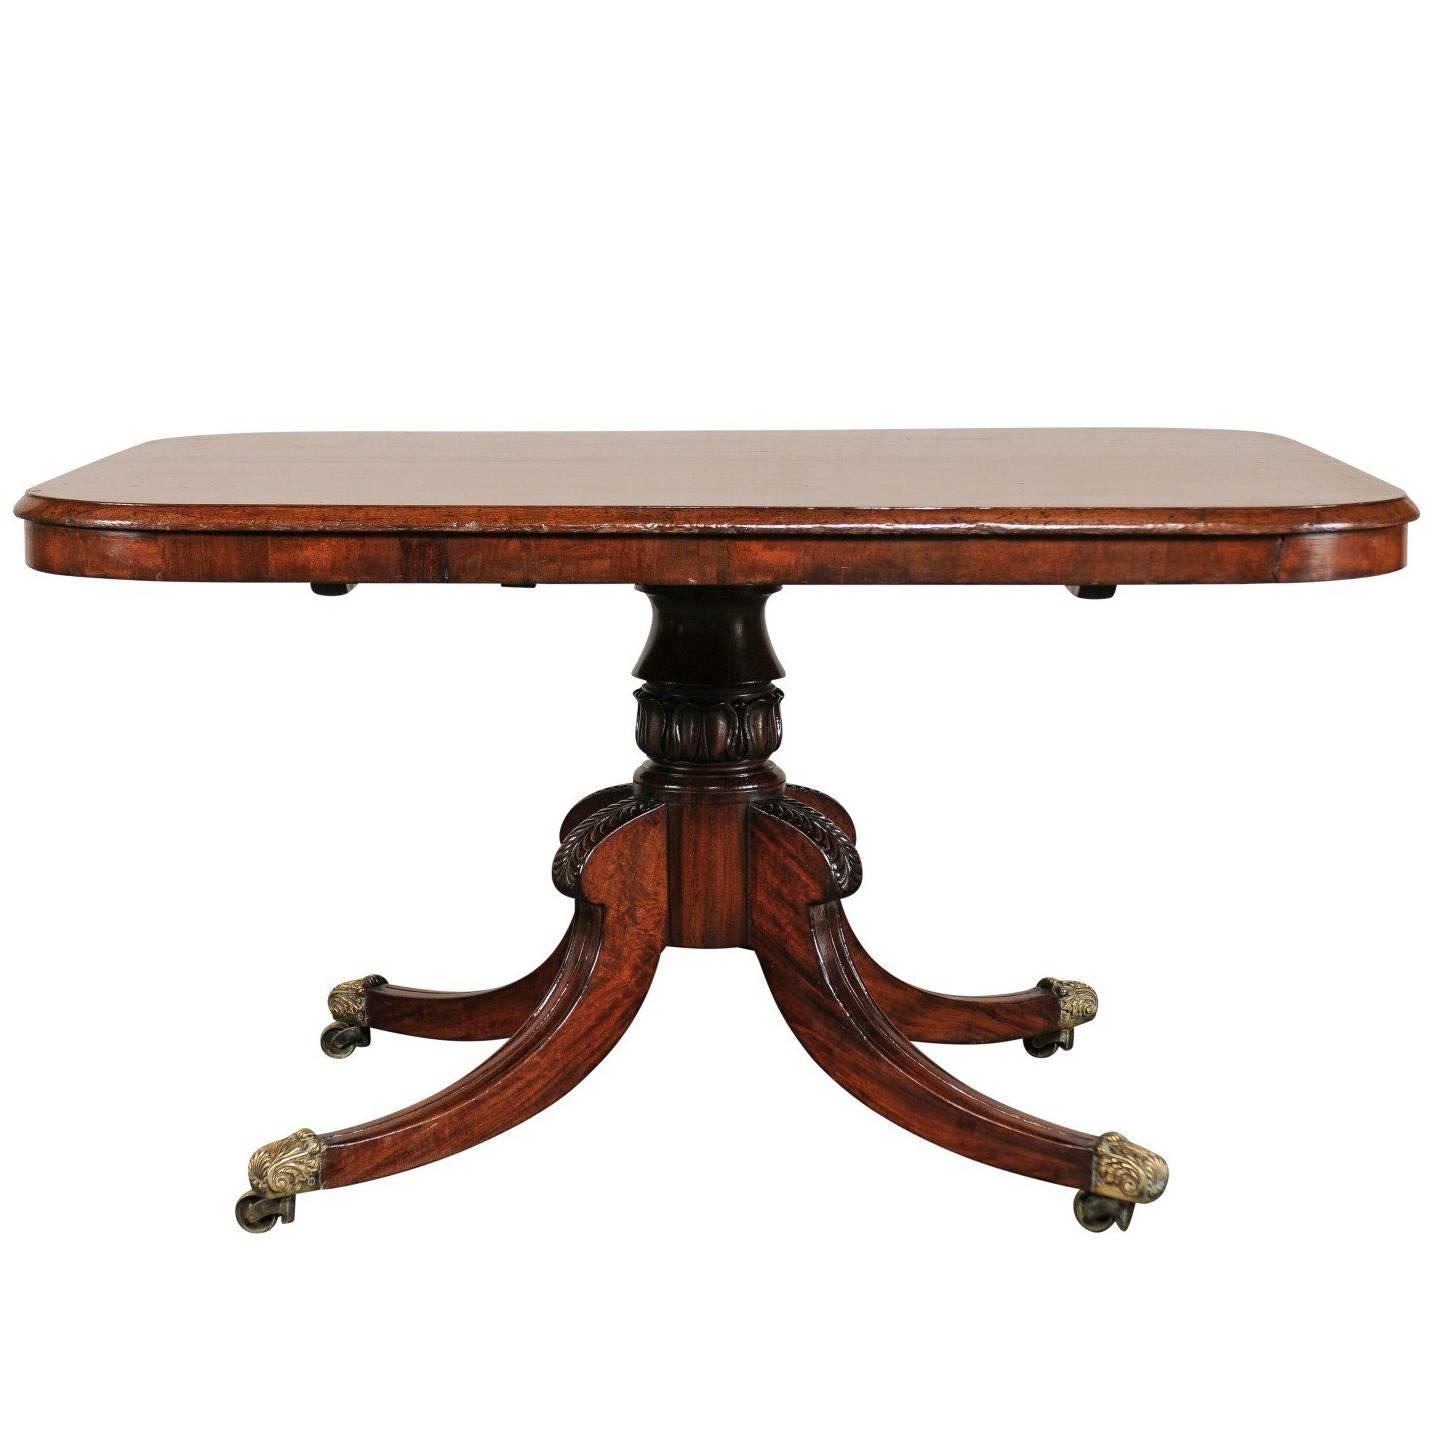 English Regency Mahogany Breakfast Table with Acanthus Leaf Detail, circa 1820